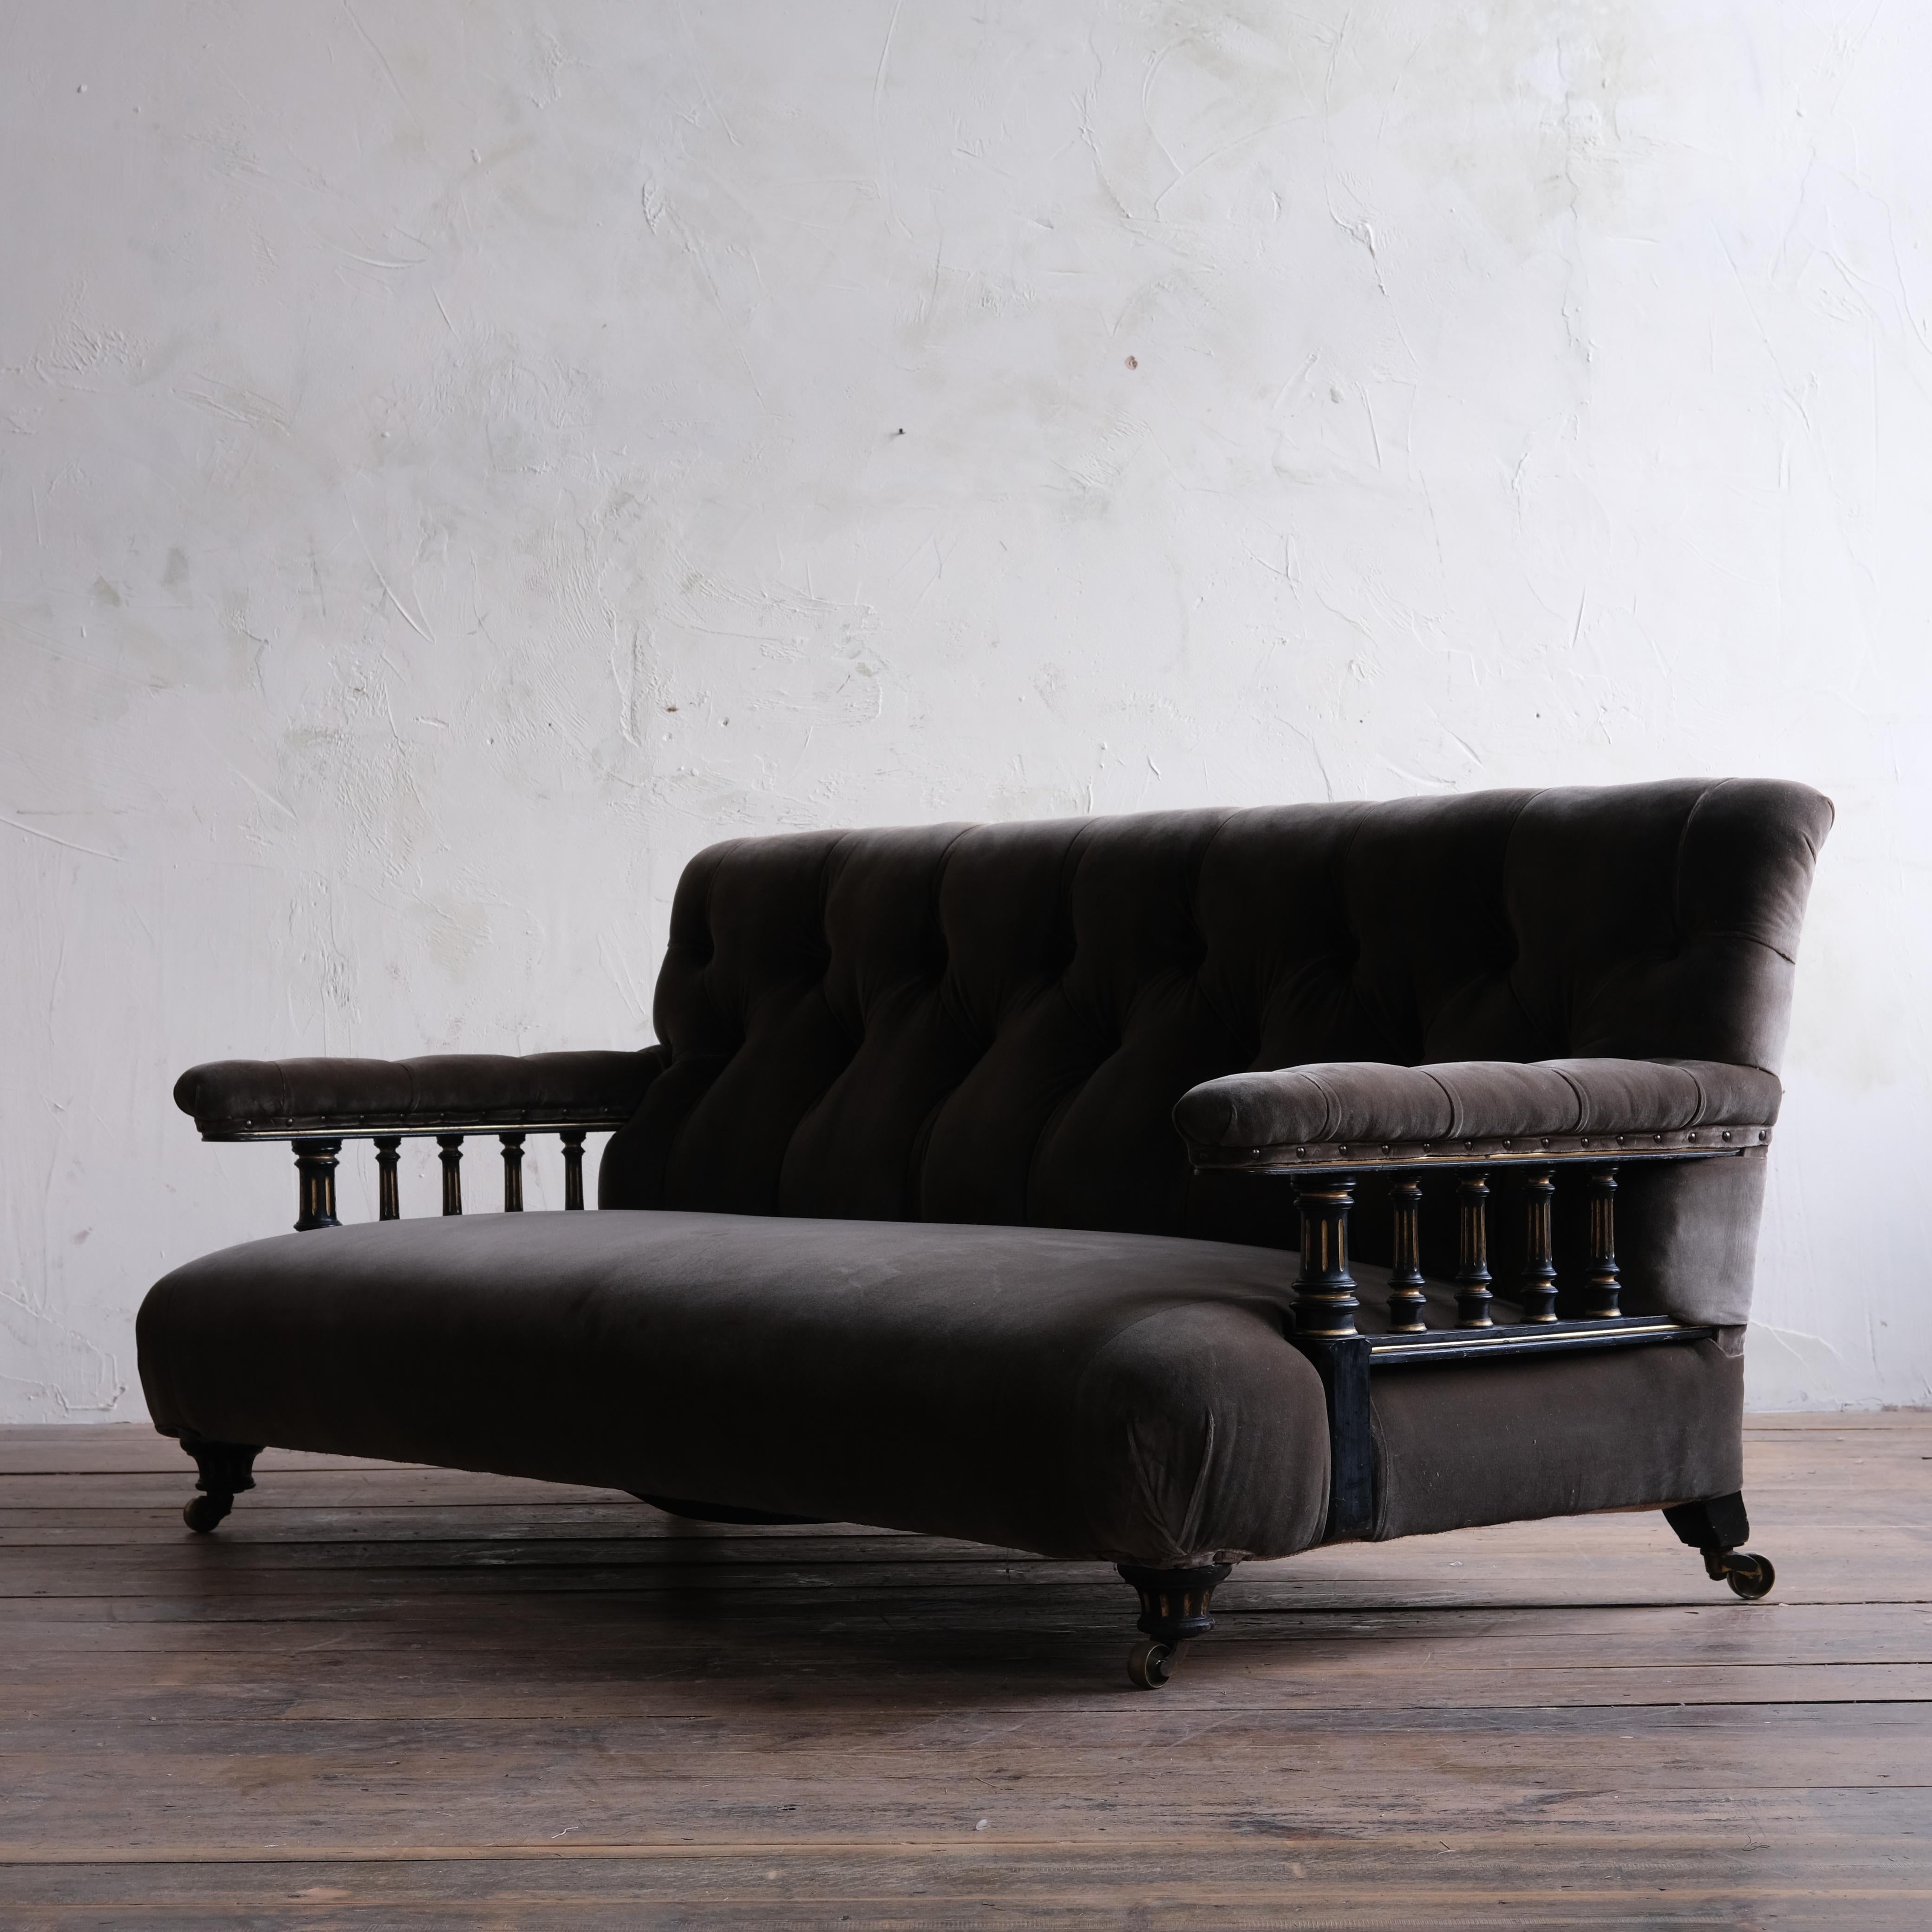 A superb 19th century open arm sofa almost certainly by Howard and sons. Upholstered in Rose Uniacke teddy cotton velvet and raised on ebonised and gilt walnut legs and arm supports. Retaining its original Cope and Collinson Brass casters. The